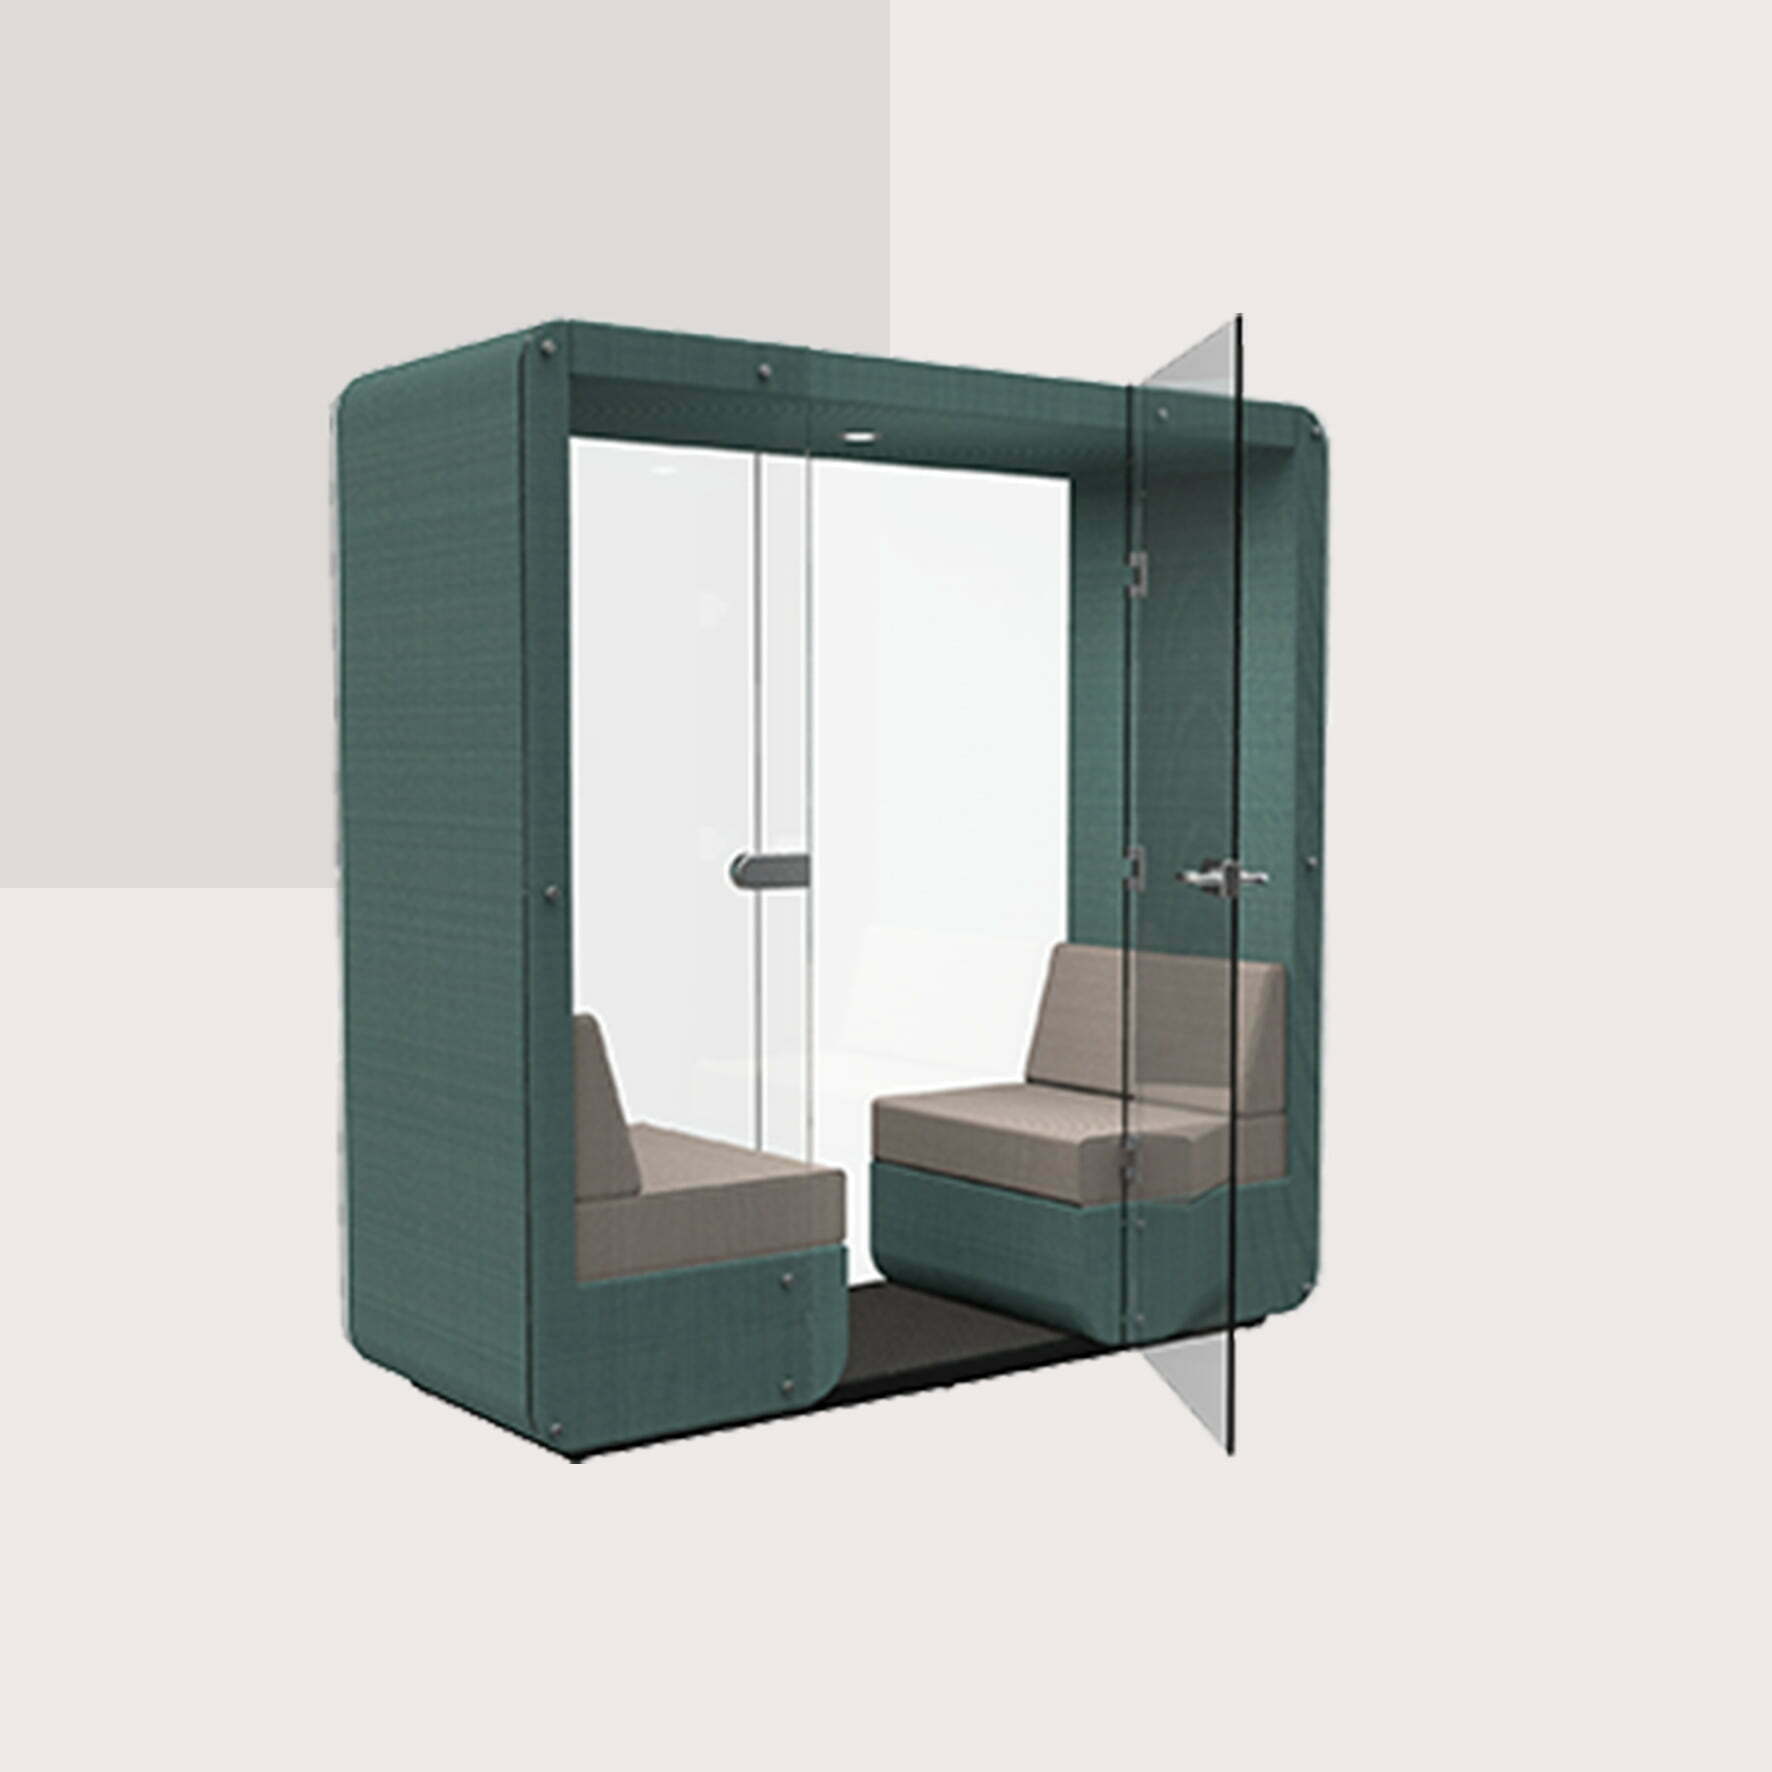 Bob 2 seat booth with glass door and wall